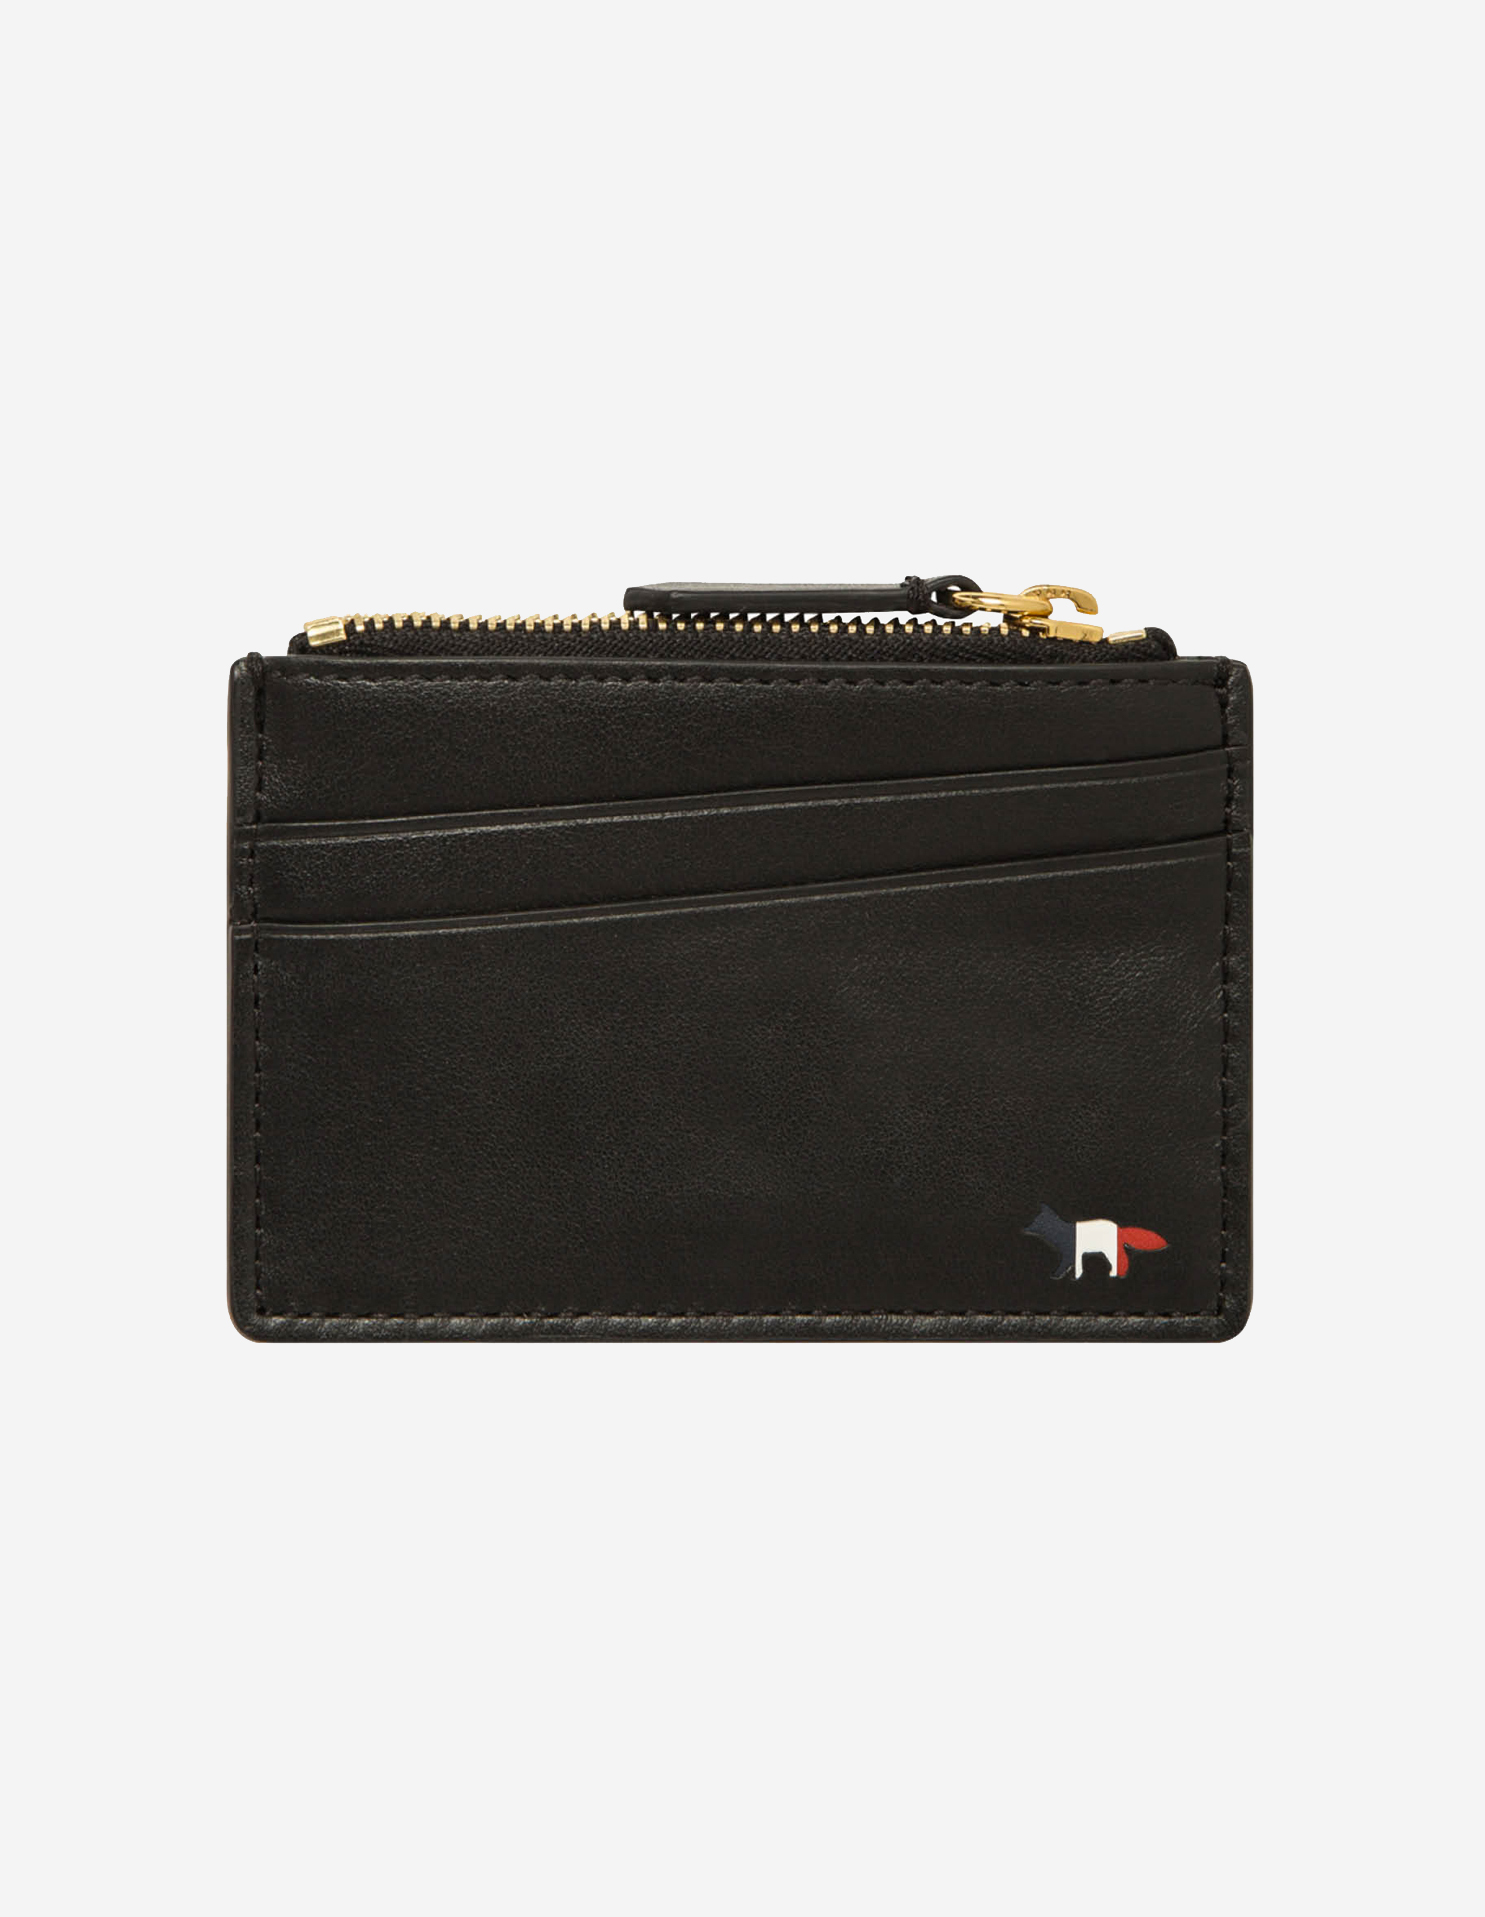 TRICOLOR ZIPPED CARD HOLDER LEATHER